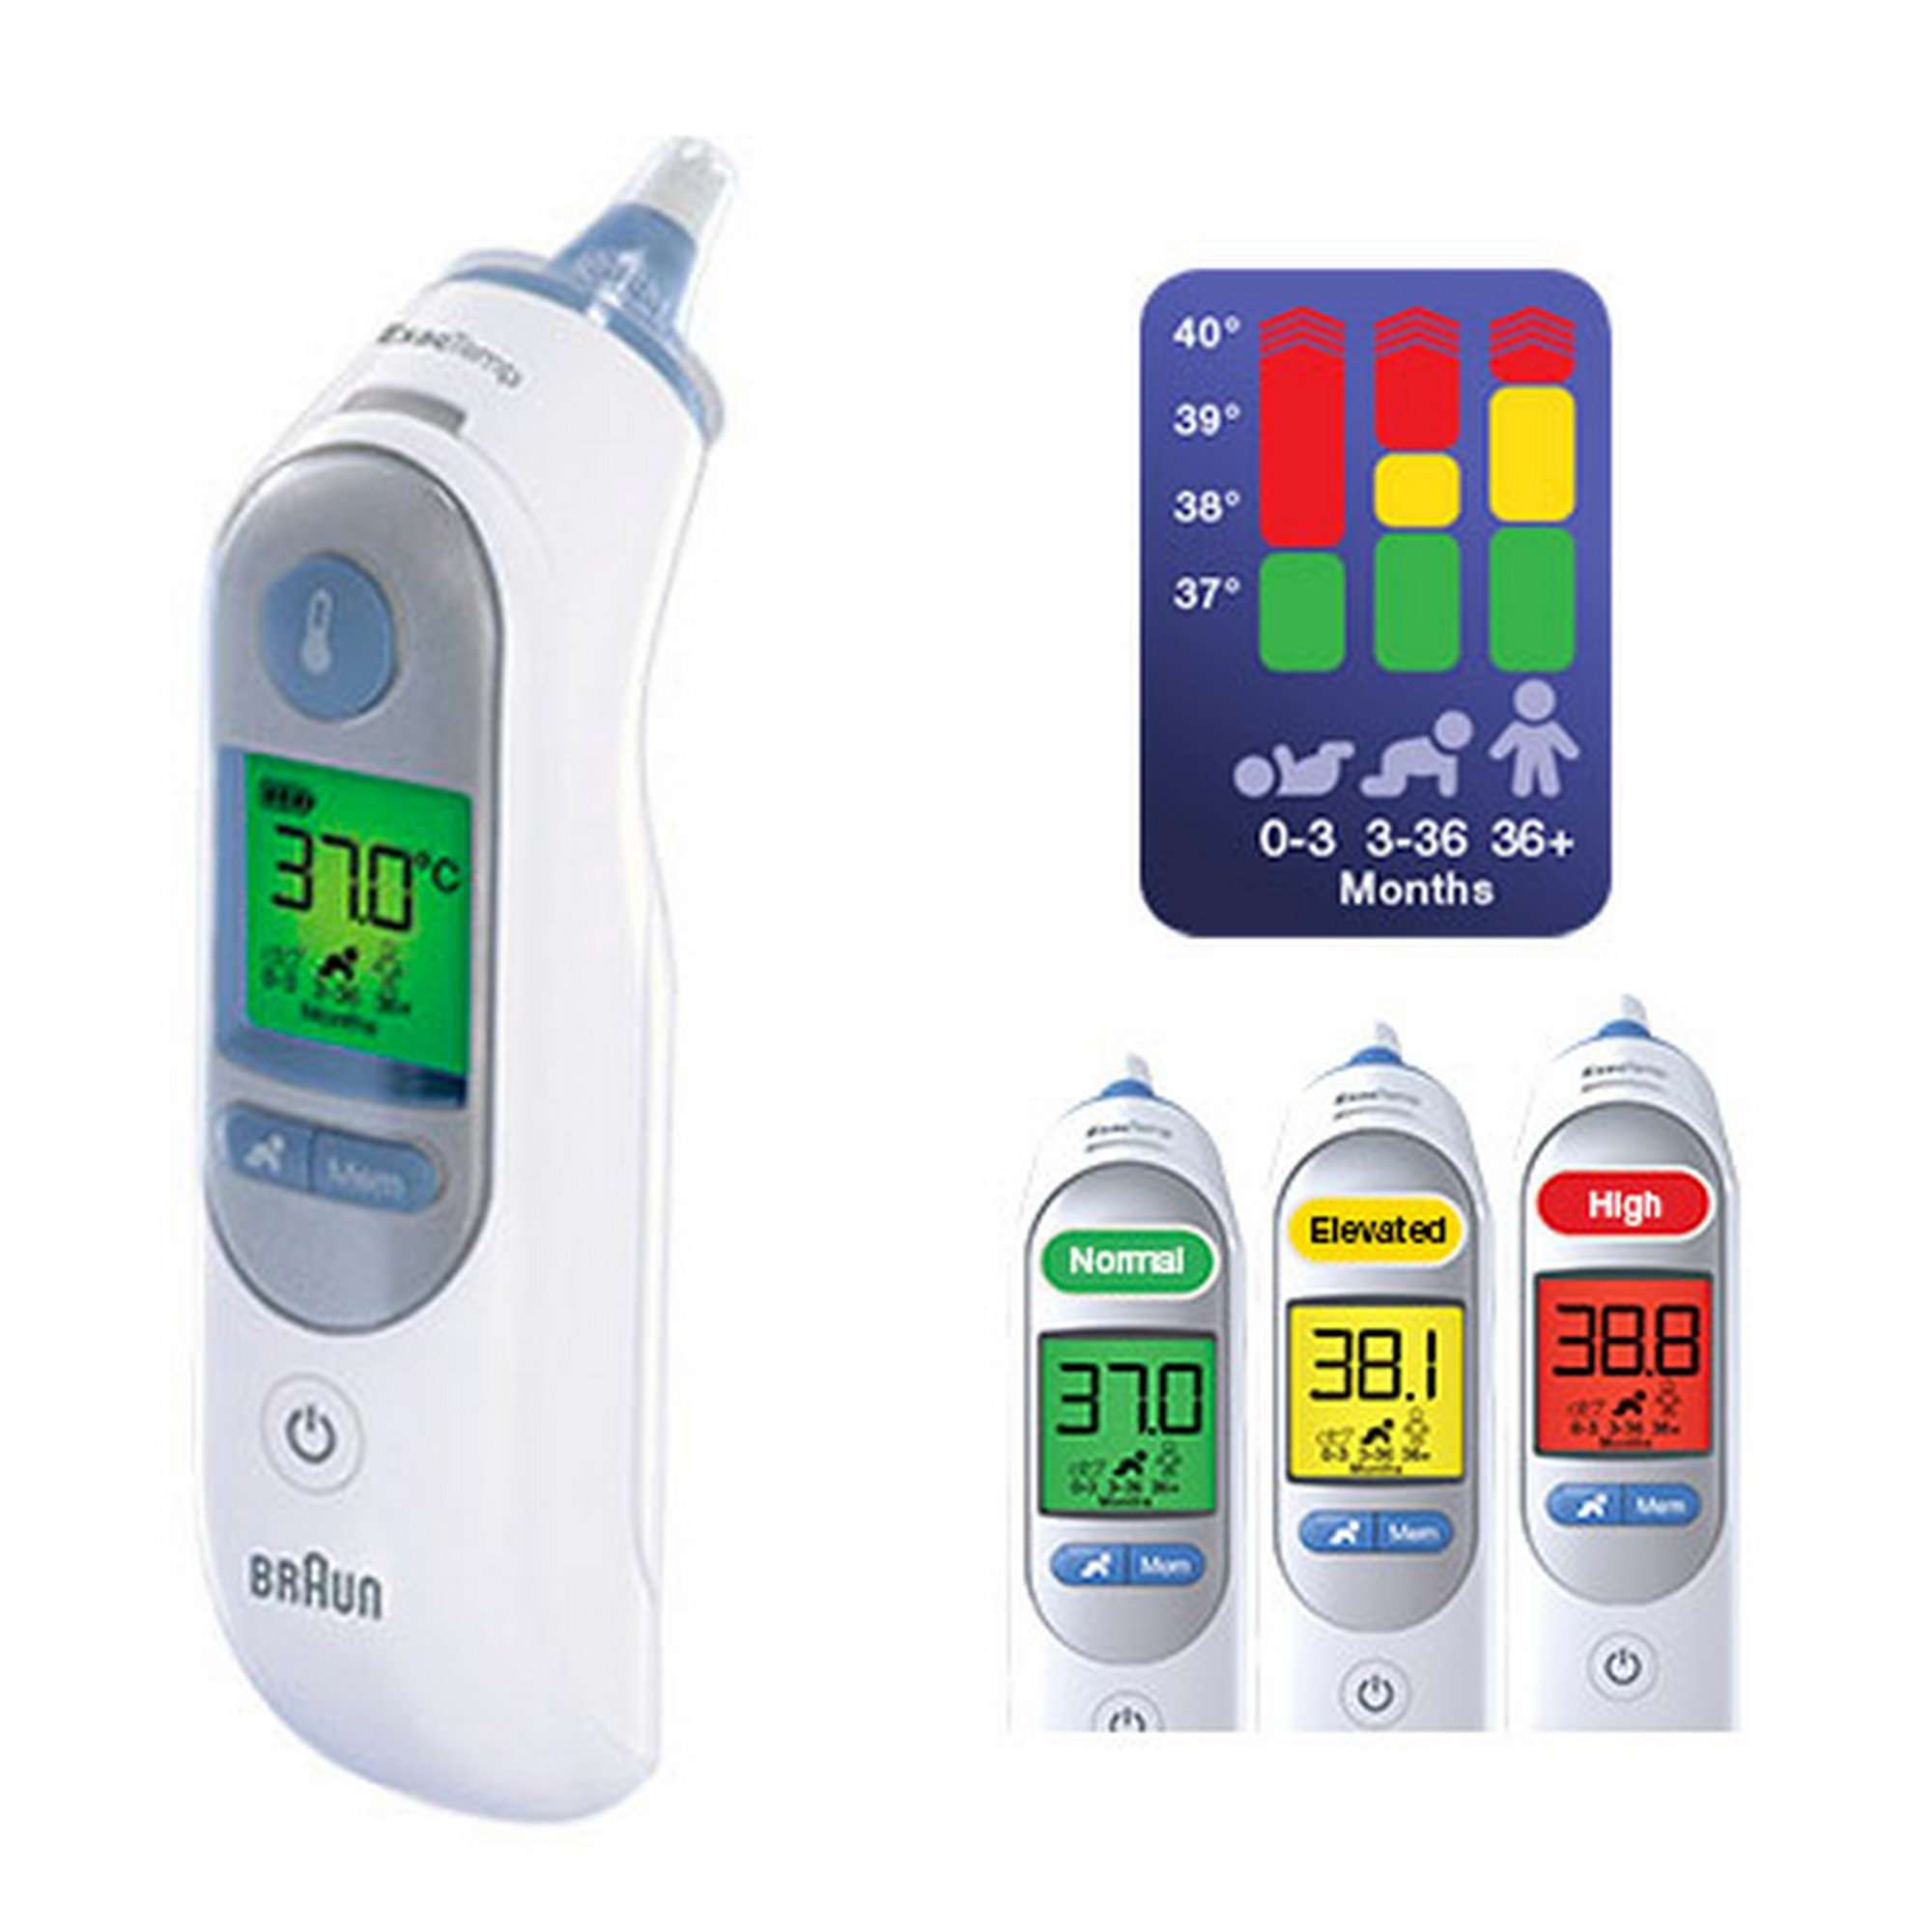 Braun ThermoScan® 7 Ear Thermometer